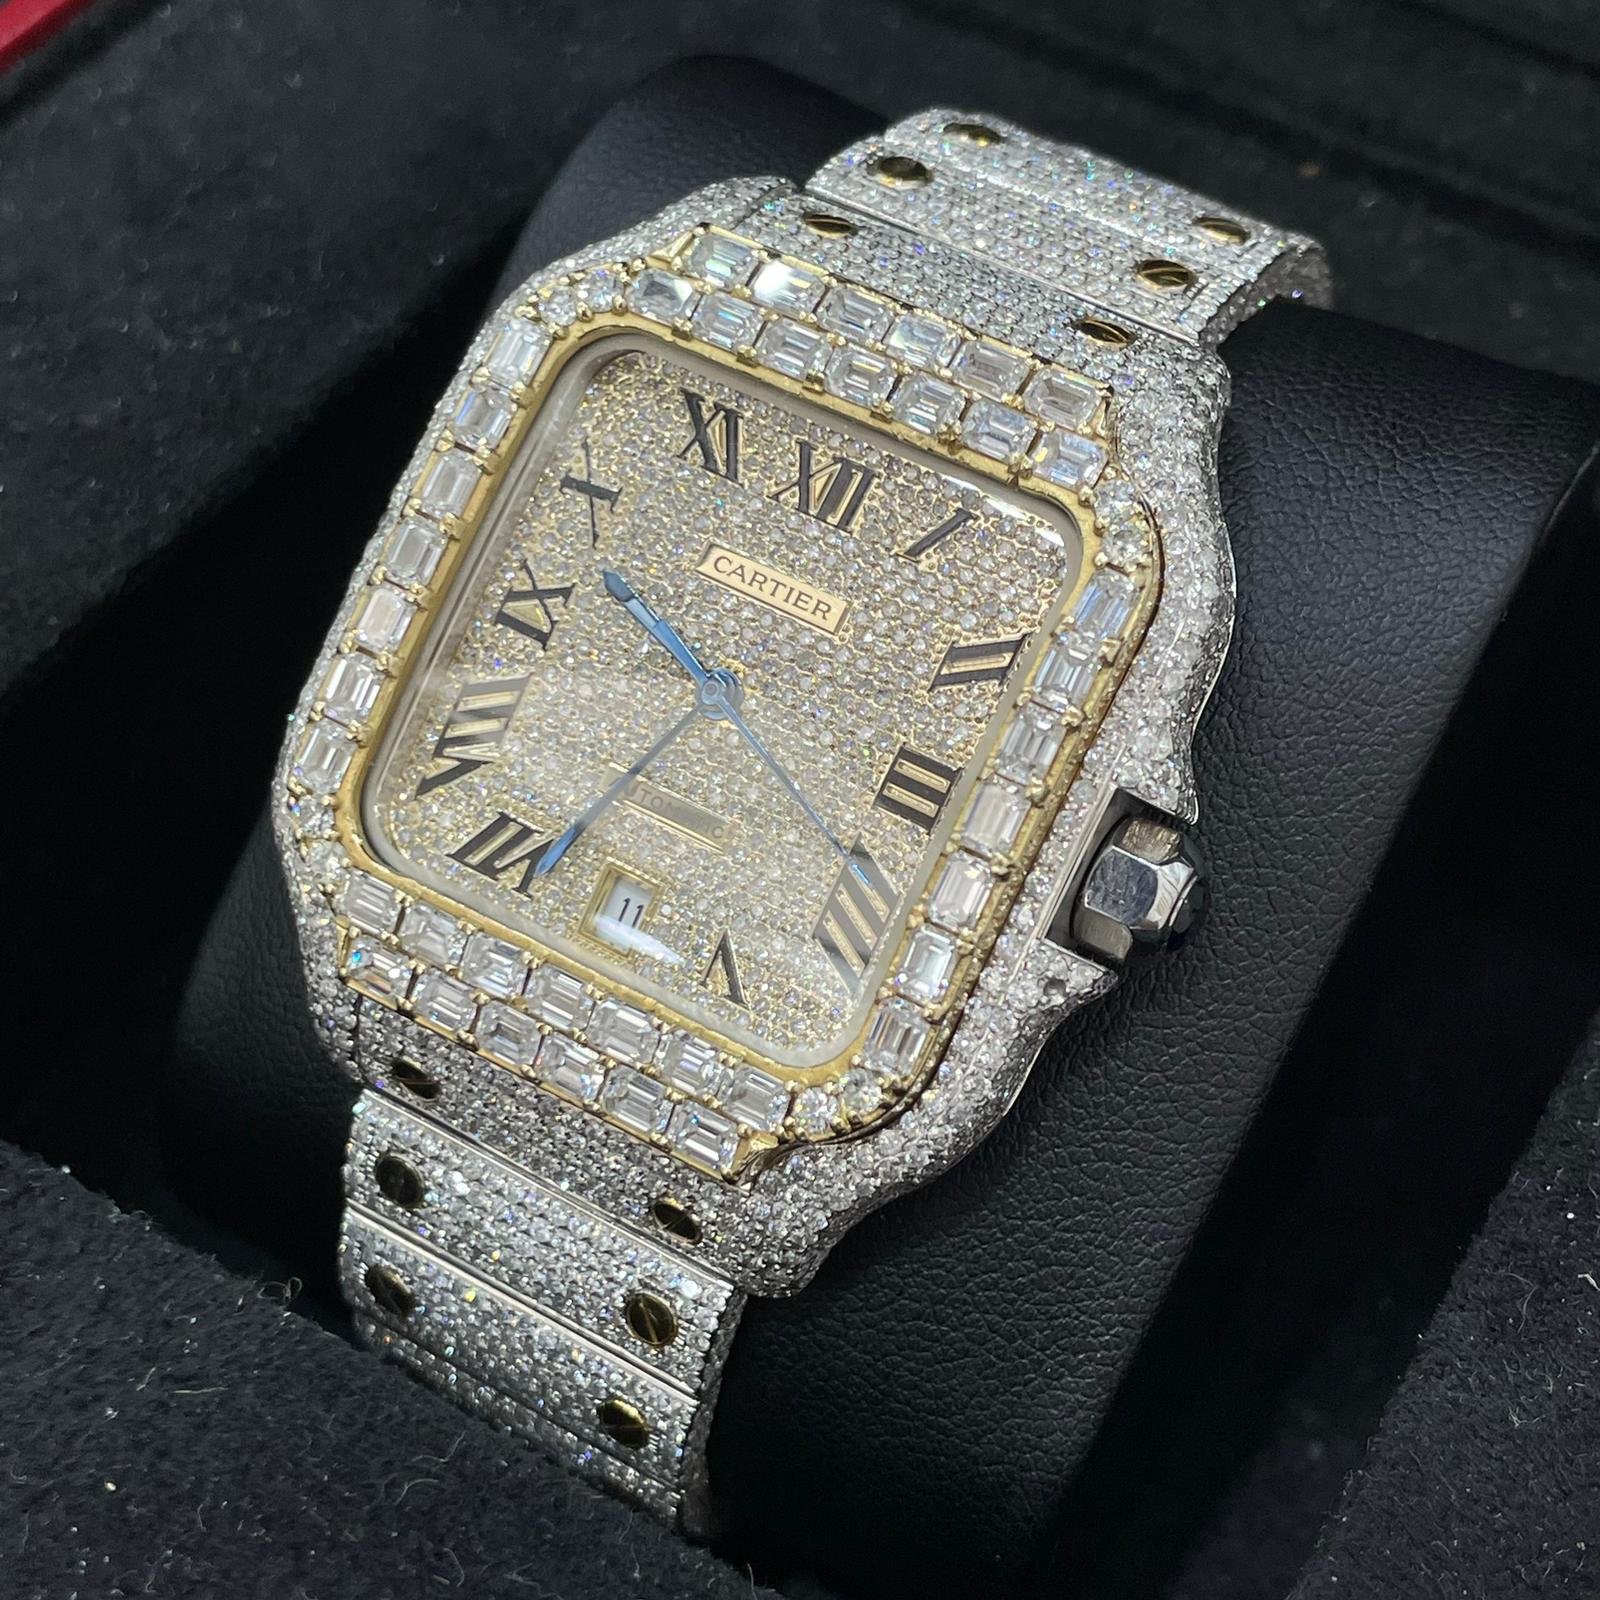  Iced Out Cartier Watch